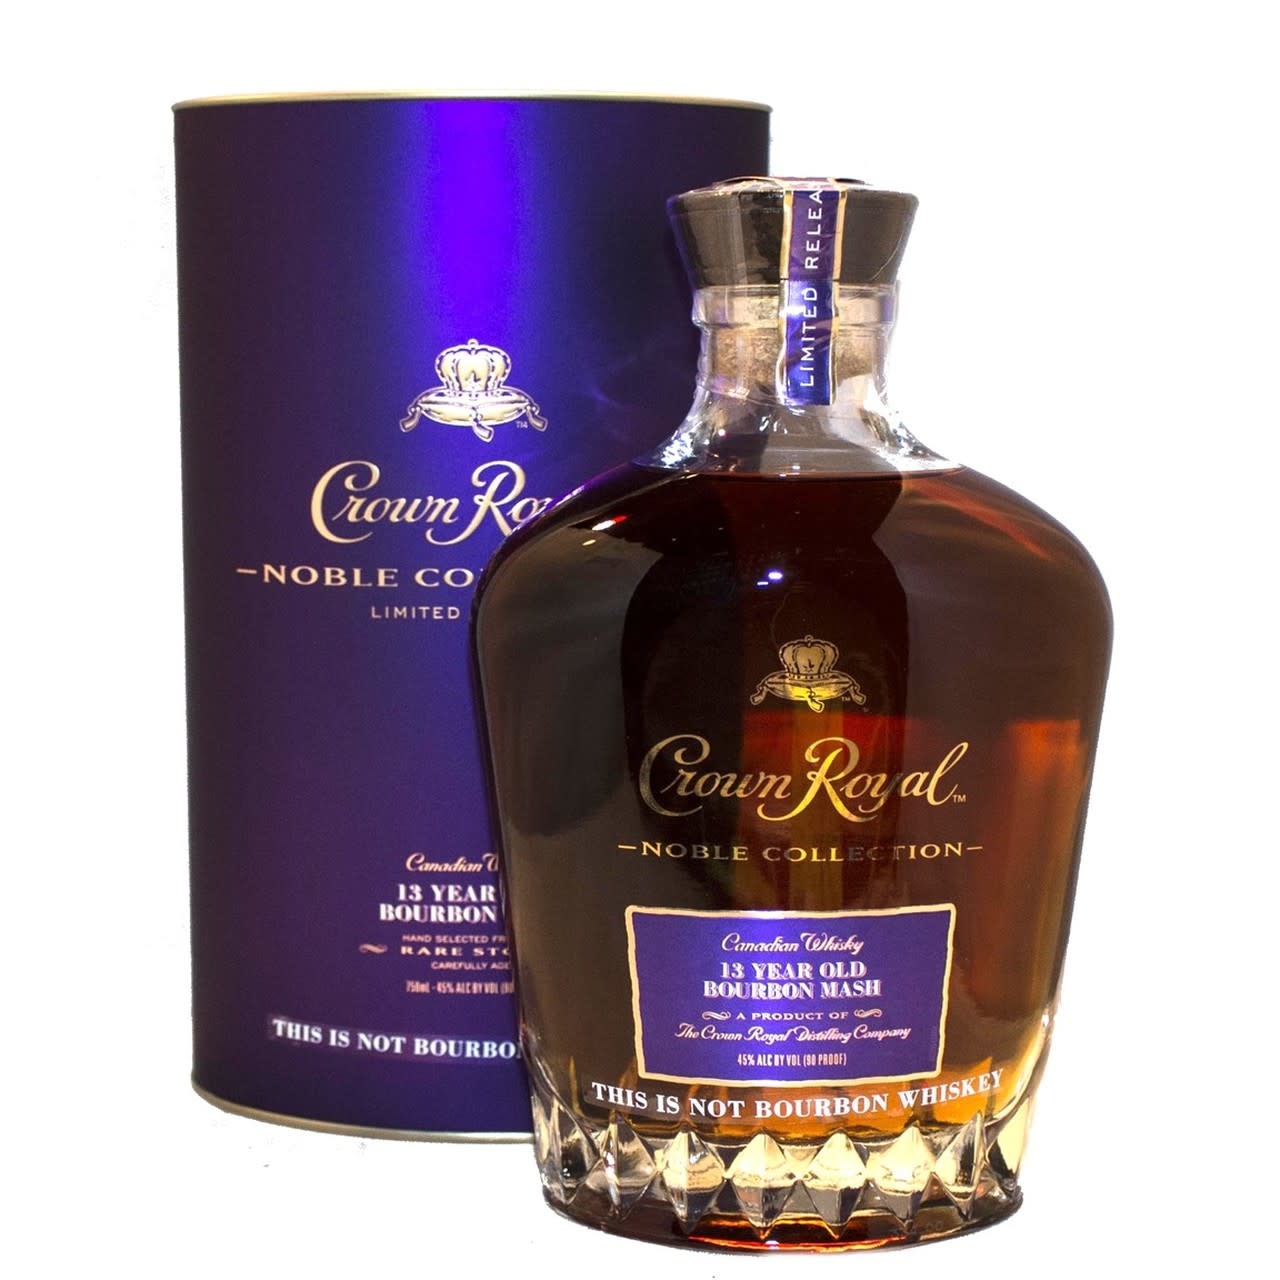 Crown Royal Noble Collection French Oak Cask Finished 750ml The Hut